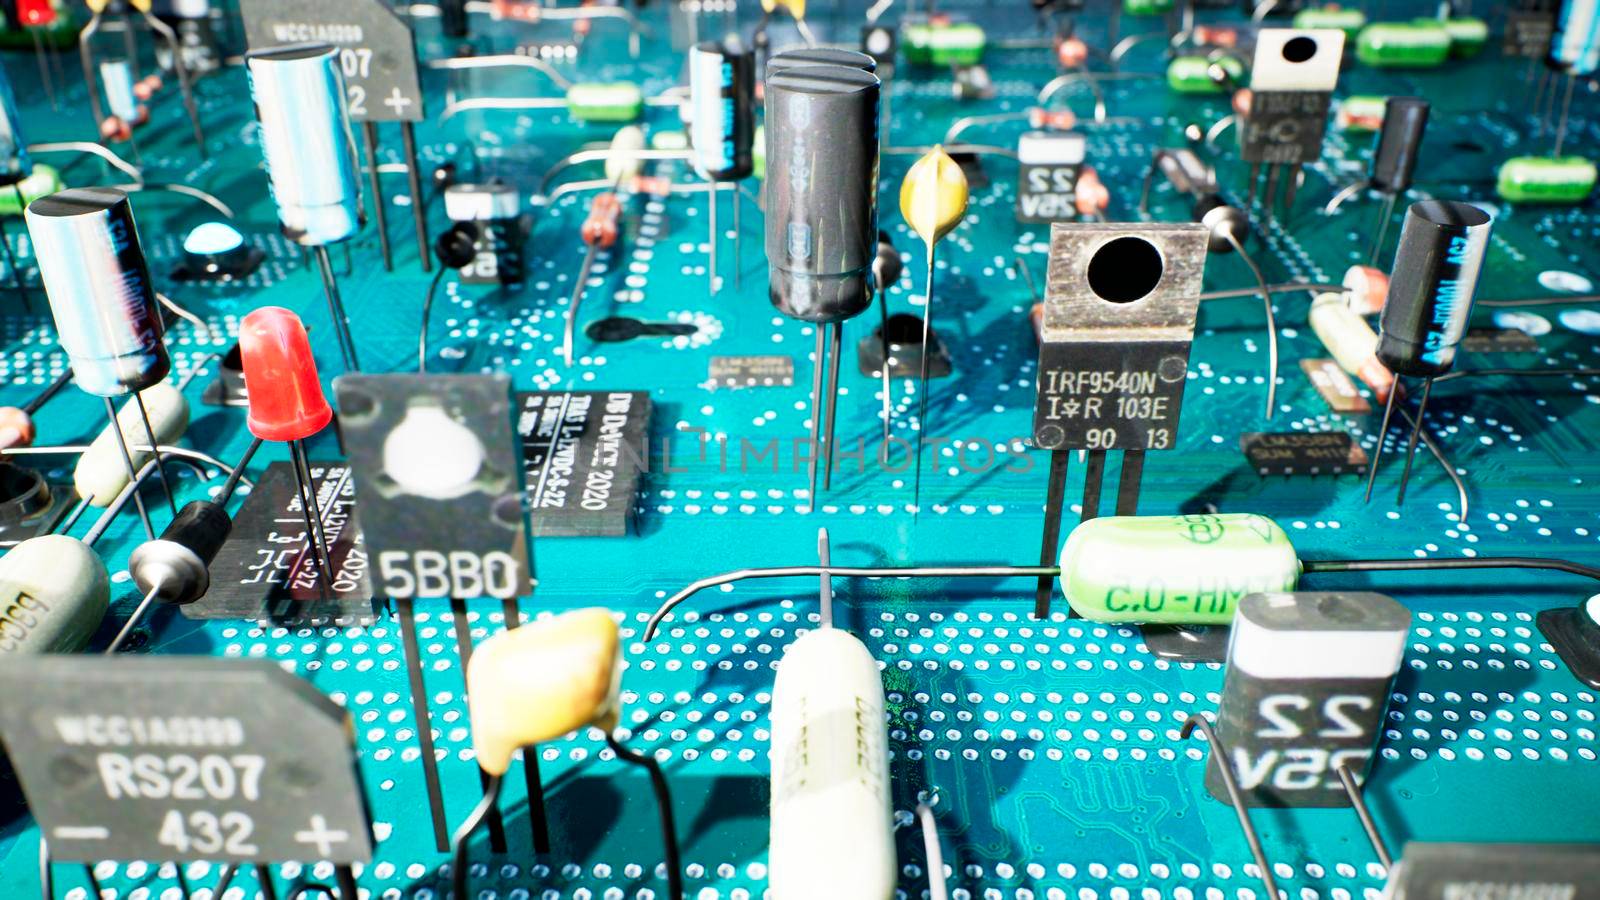 Electronic components inside a technological device: microchips, transistors, LEDs, and semiconductors.